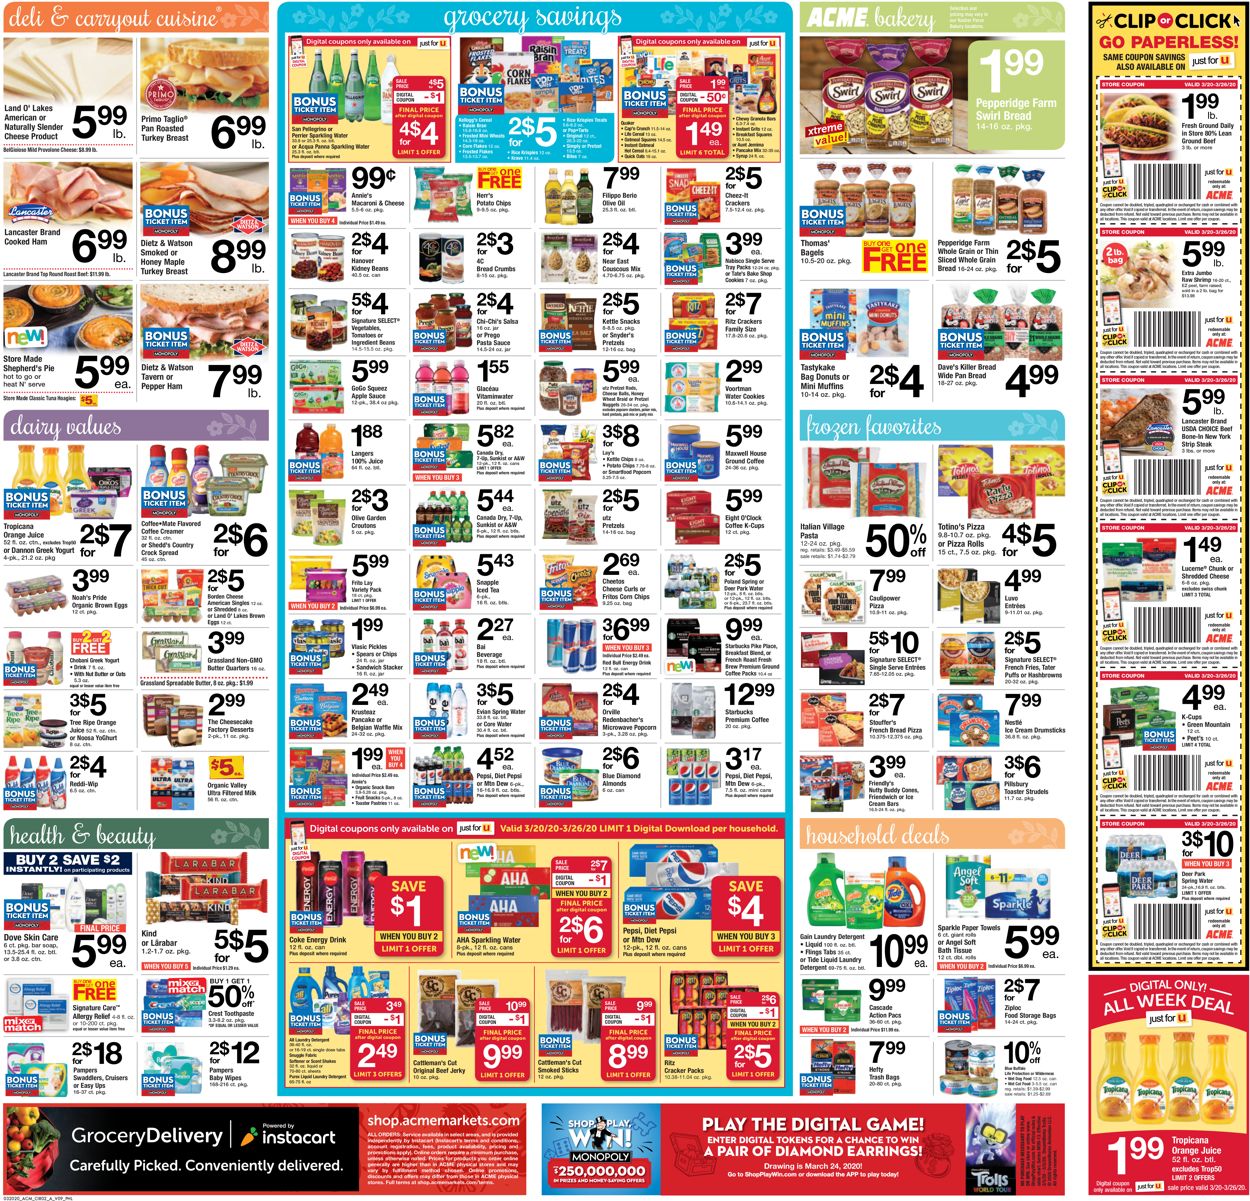 Catalogue Acme from 03/20/2020